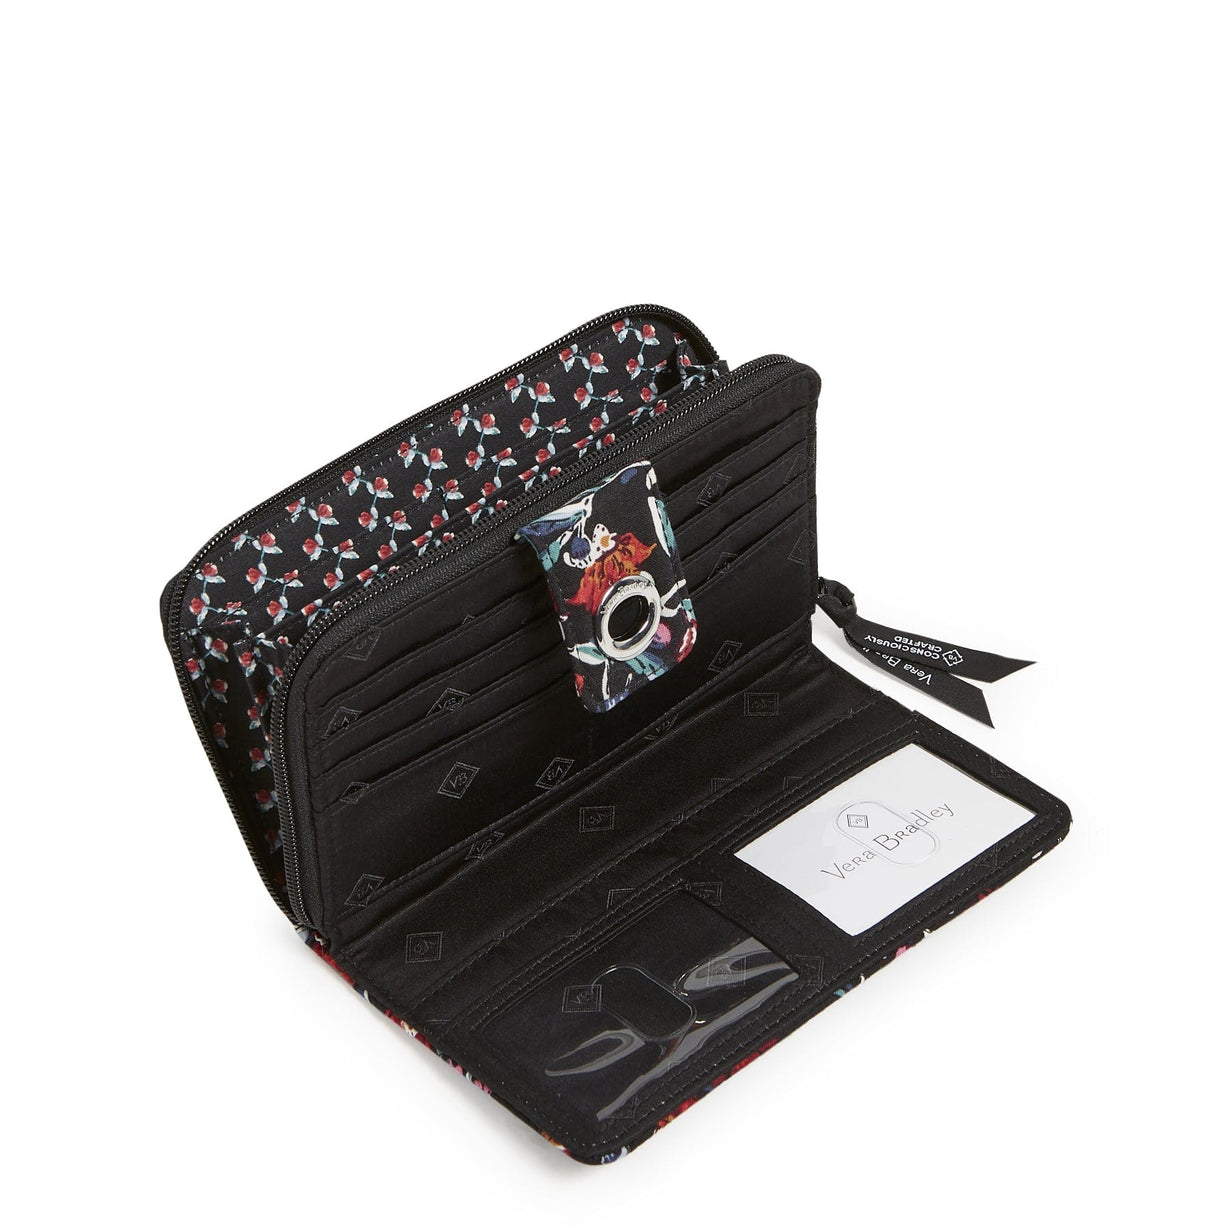 Complimentary Turnlock Card Case Wristlet